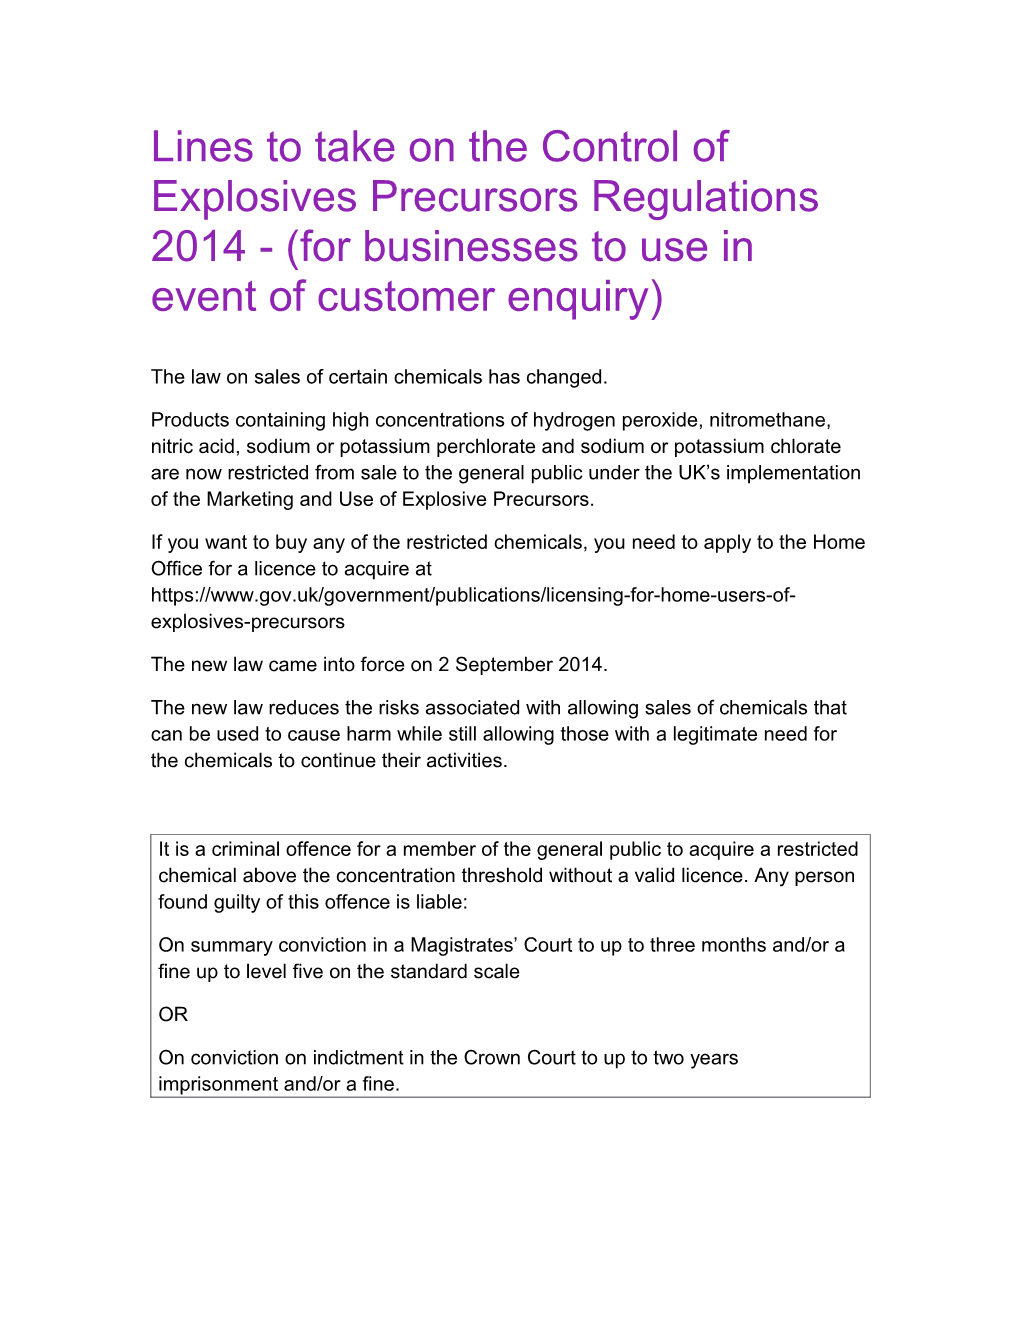 Lines to Take on the Control of Explosives Precursors Regulations 2014 - (For Businesses